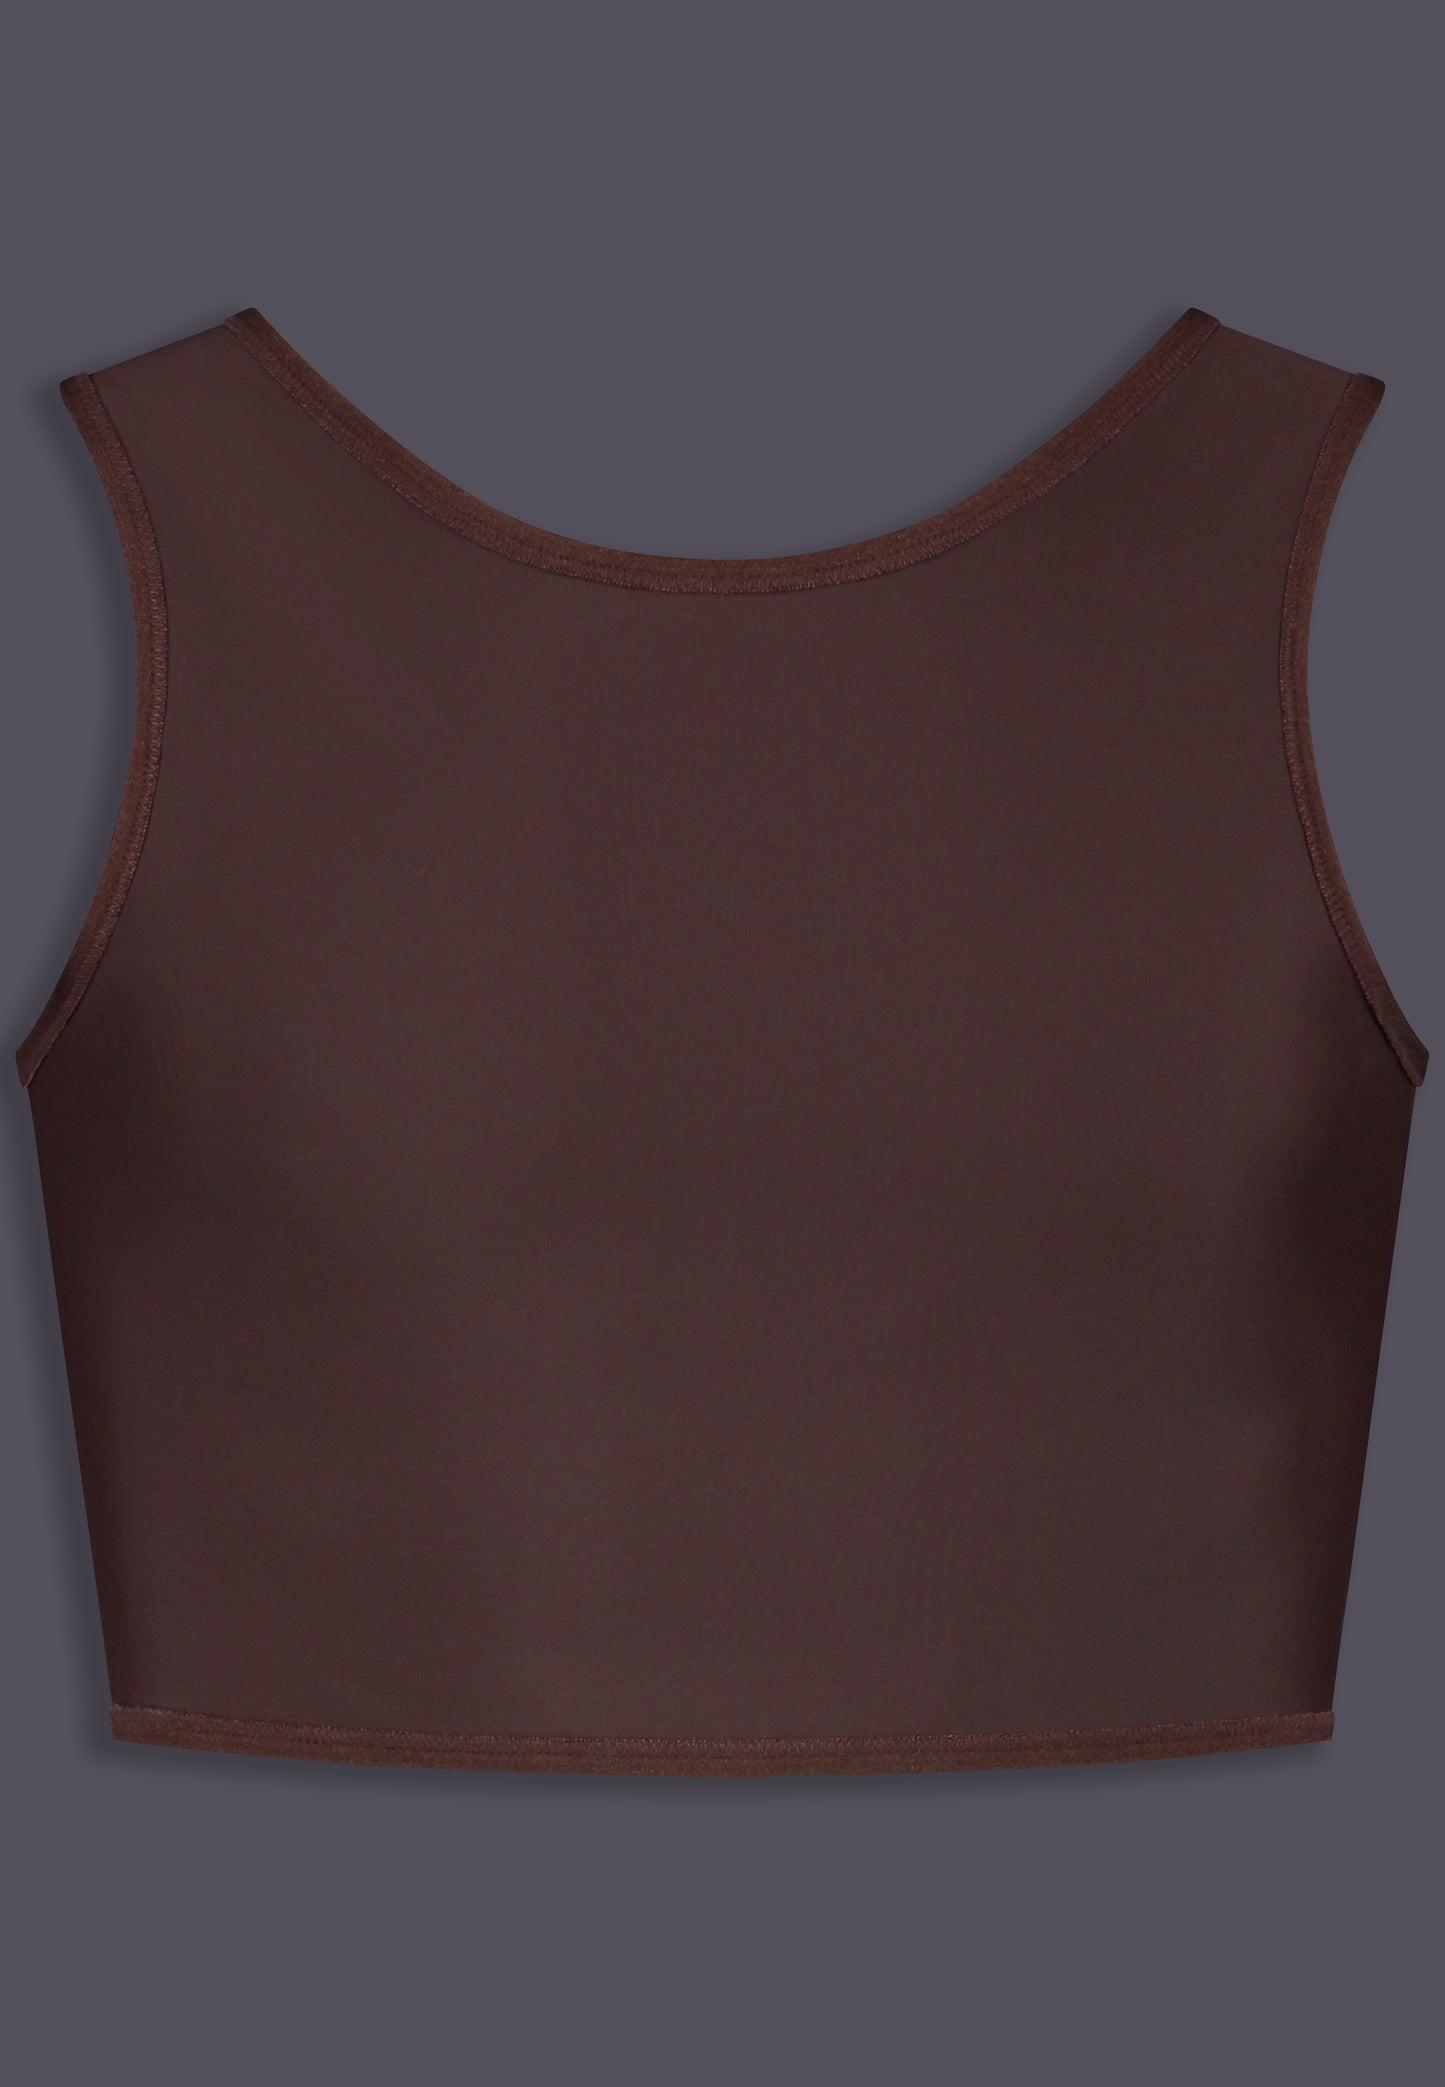 Front view of the brown short chest binder by UNTAG 